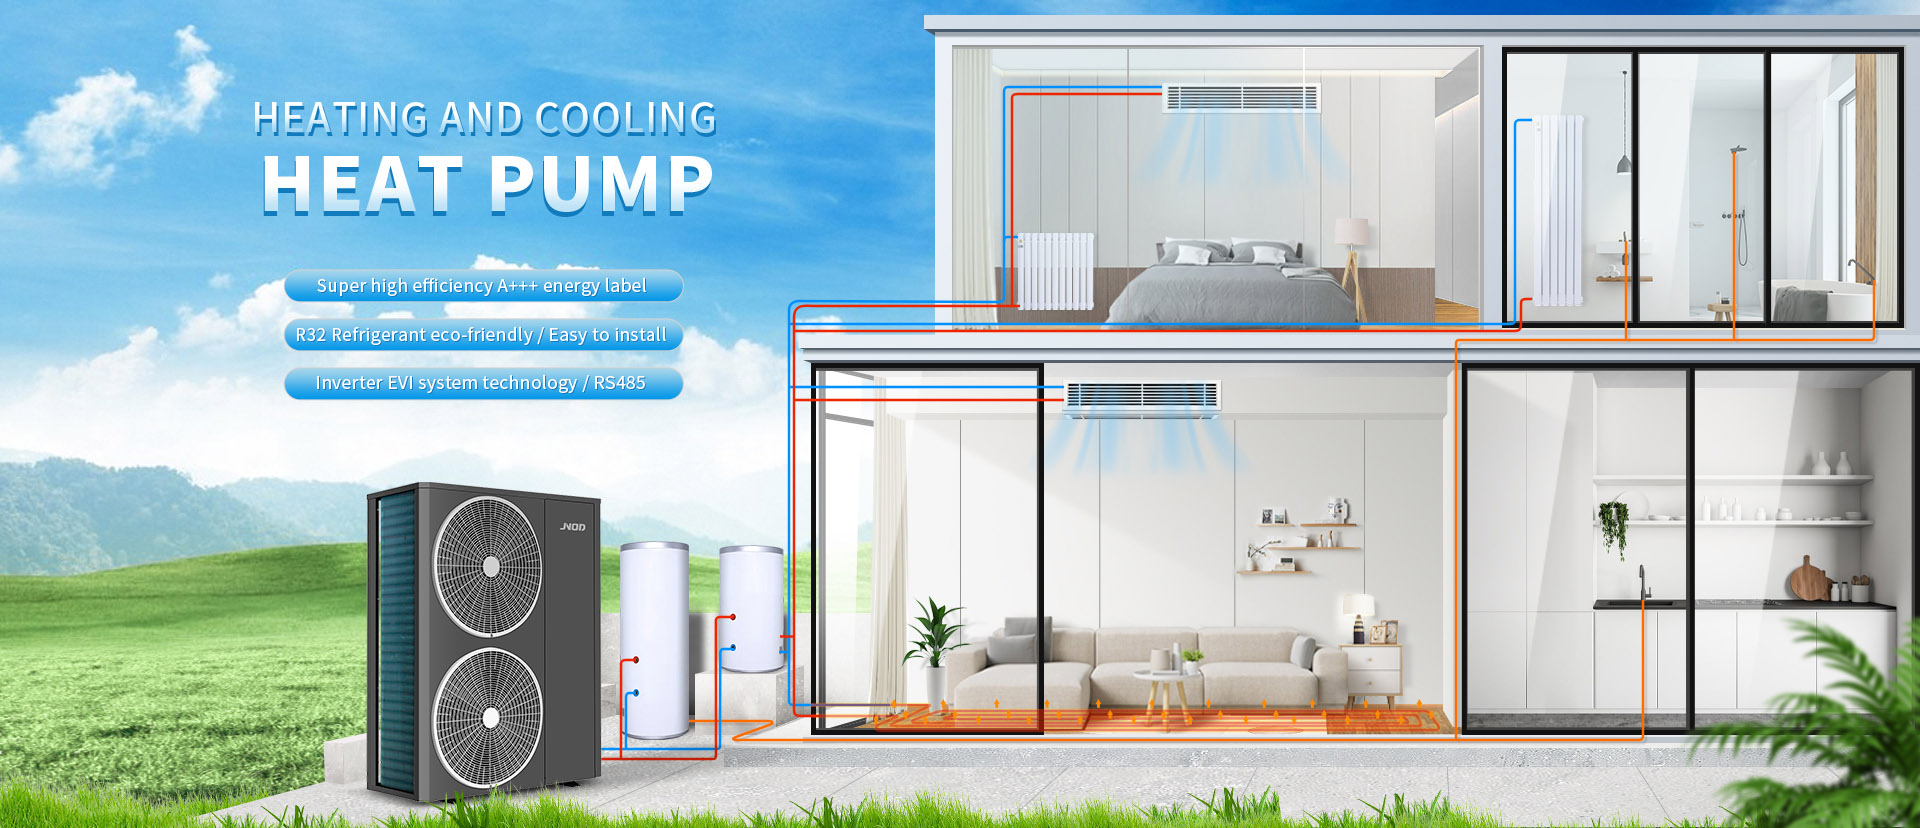 Advanced Home Heating And Cooling Heat Pump